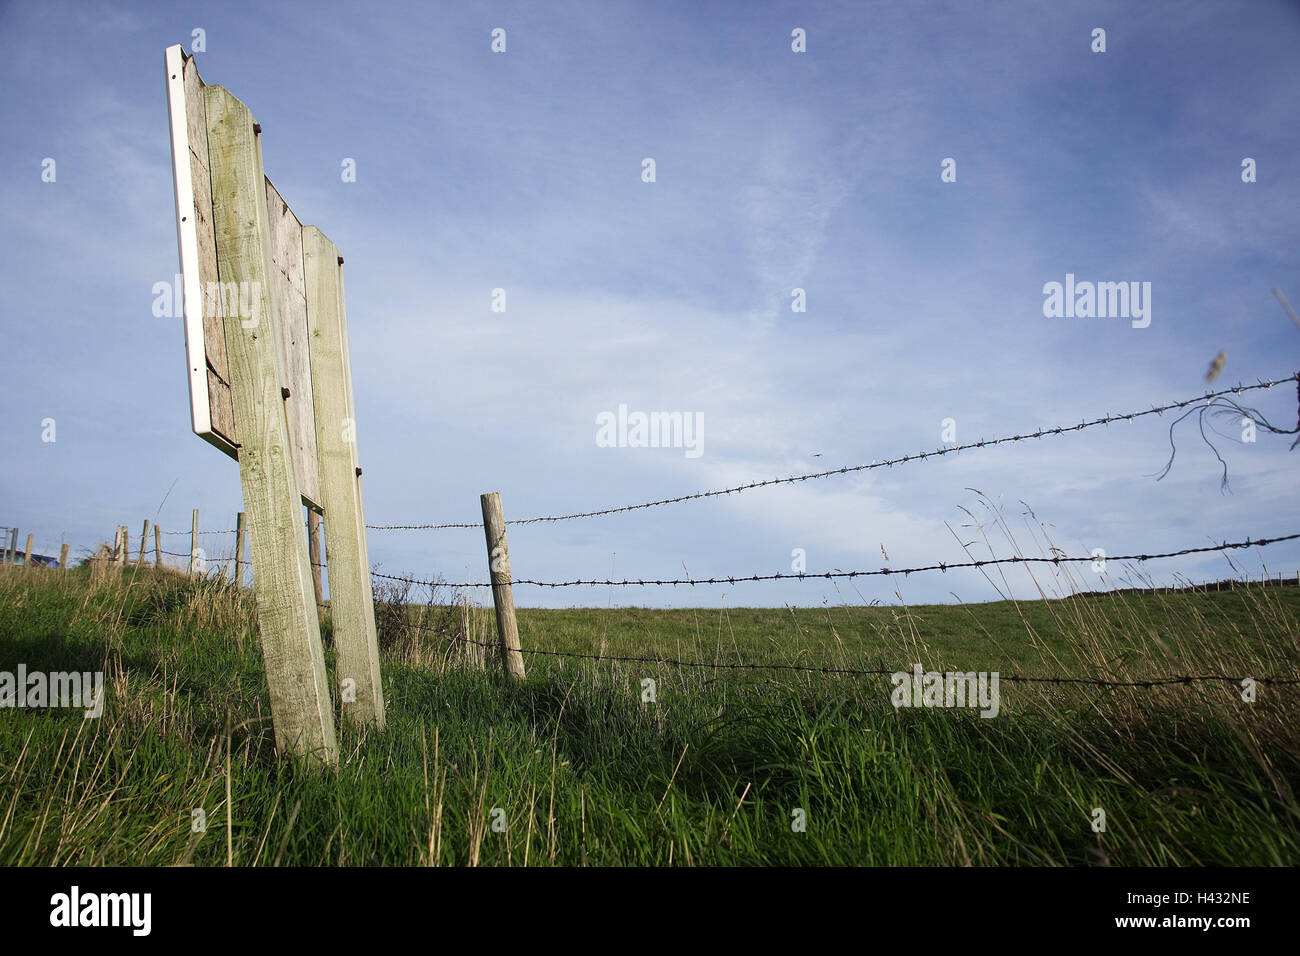 Great Britain, meadow, pasture fence, wooden sign, island, scenery, pasture scenery, pasture, fence, grass, barbed wire, barbed wire fence, demarcation, blocking, plot boundary, sign, nobody, cloudy sky, Stock Photo